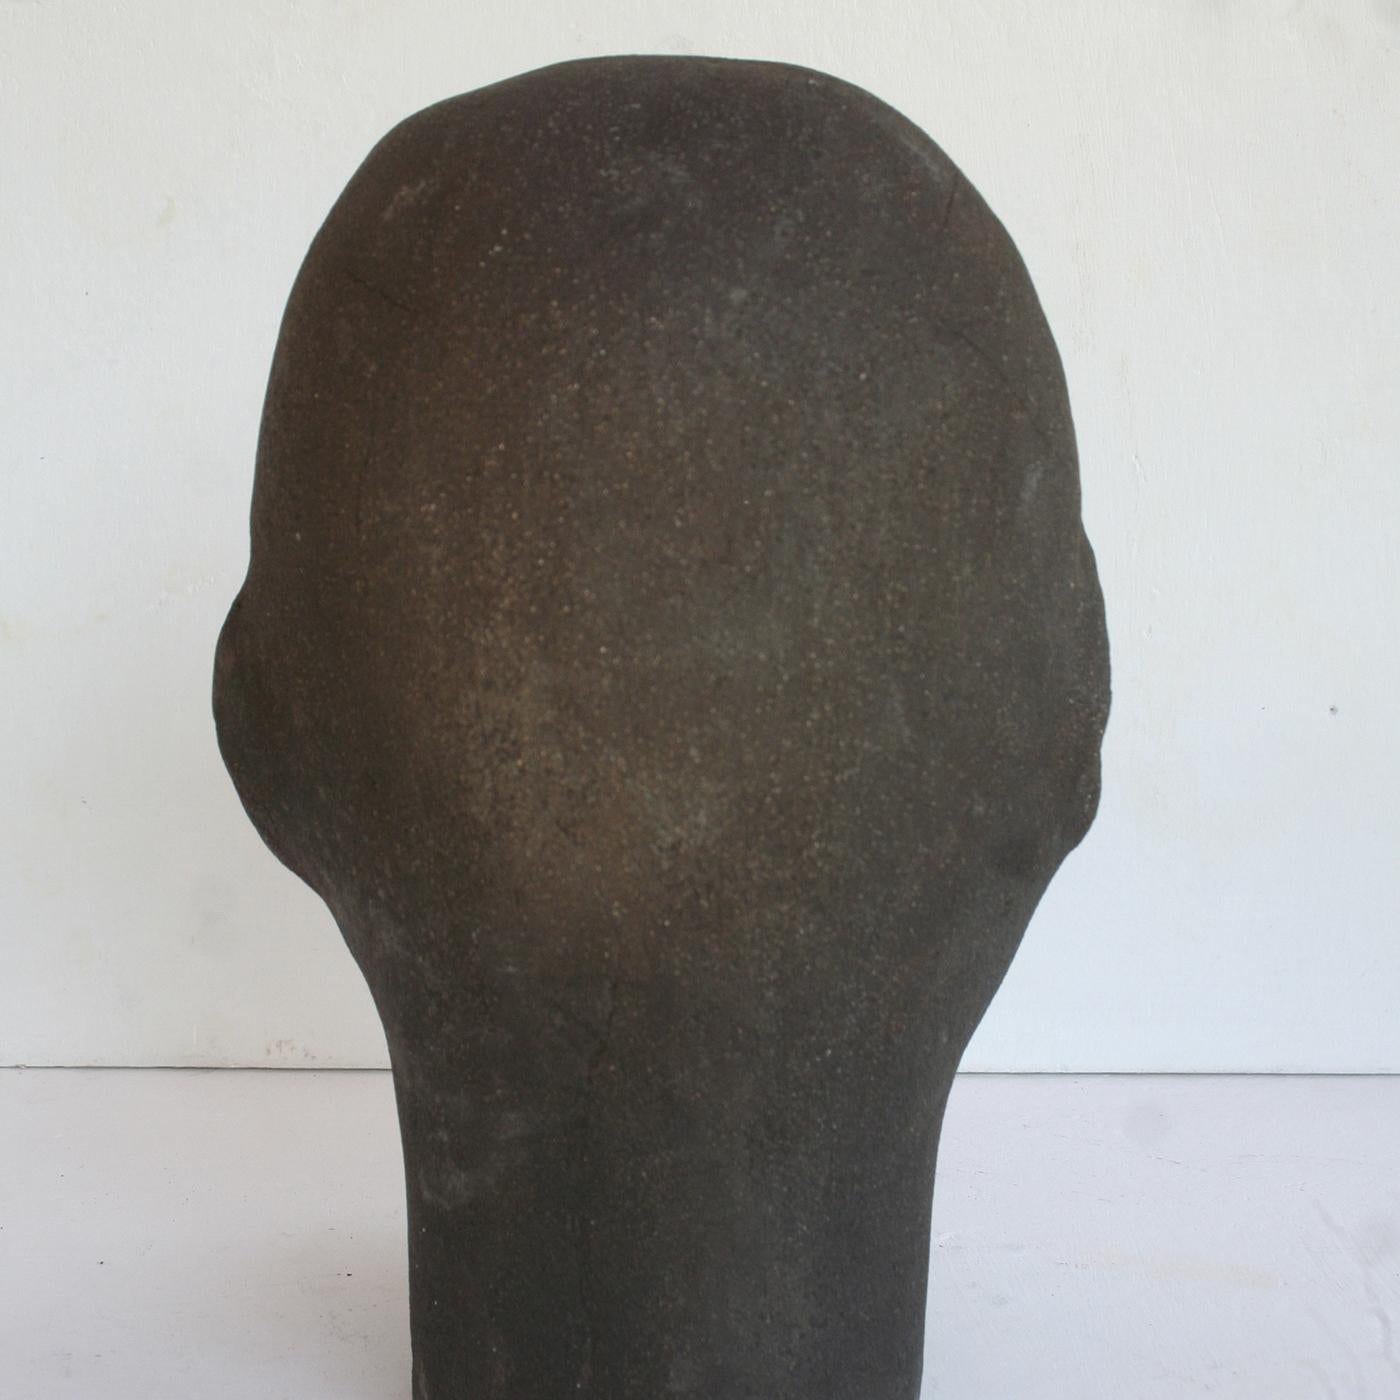 Contemporary yet Classic in its essence, this sculpture is an impressive piece that combines bold graphic elements and organic fluidity in perfect harmony. Entirely crafted by hand of ceramics, this piece features the silhouette of a head with